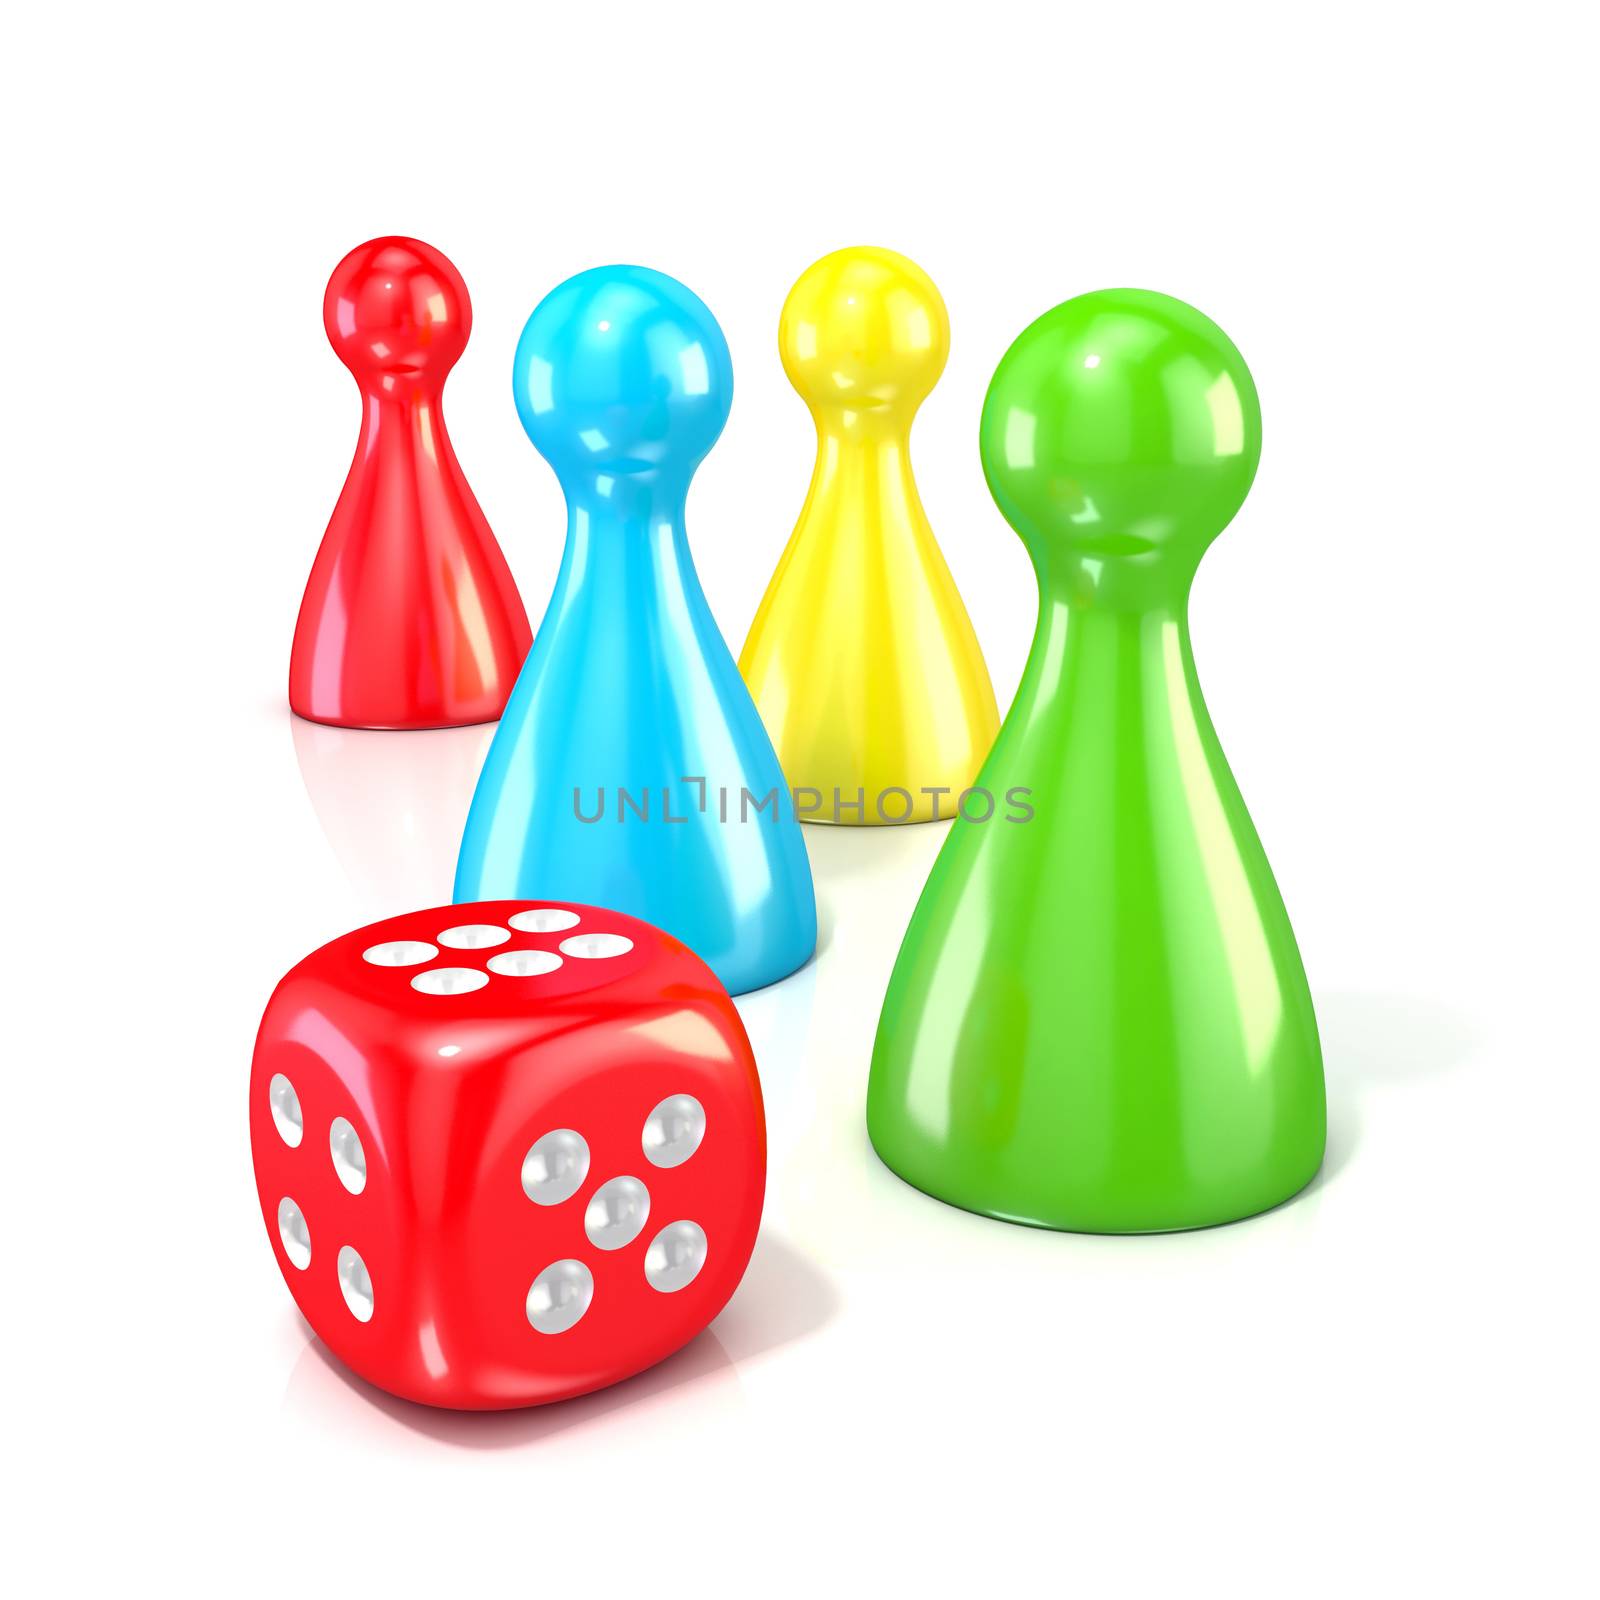 Board game figures with red dice. 3D render illustration isolated on white background